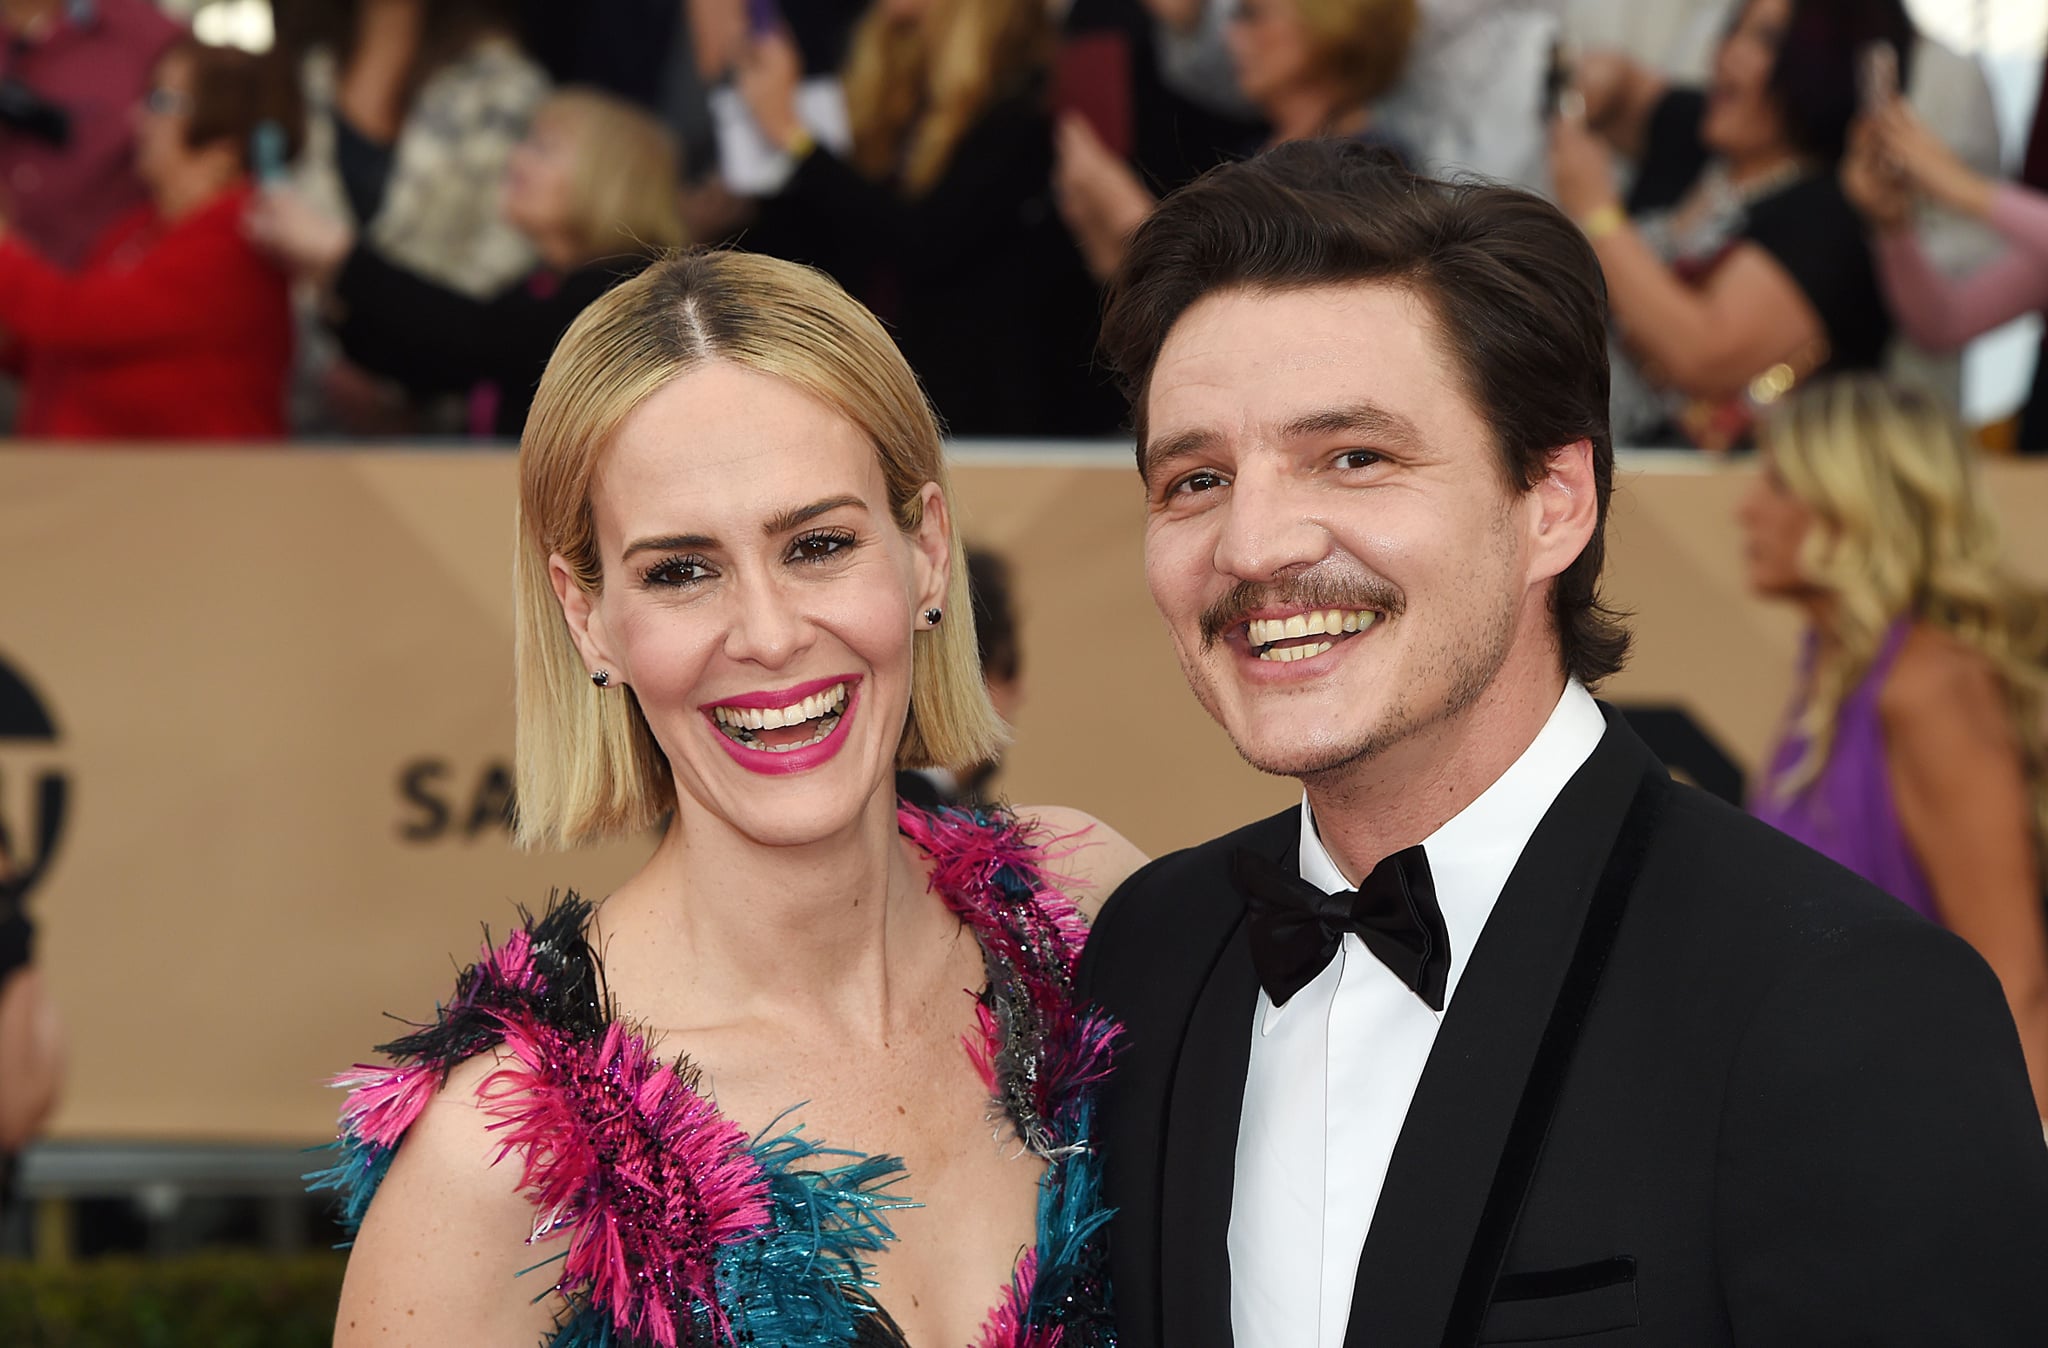 Actress Sarah Paulson and actor Pedro Pascal attend the 22nd Annual Screen Actors Guild Awards at The Shrine Auditorium on January 30, 2016 in Los Angeles, California.  PHOTO AFP / MARK RALSTON / AFP / MARK RALSTON (Photo credit should read MARK RALSTON / AFP via Getty Images)